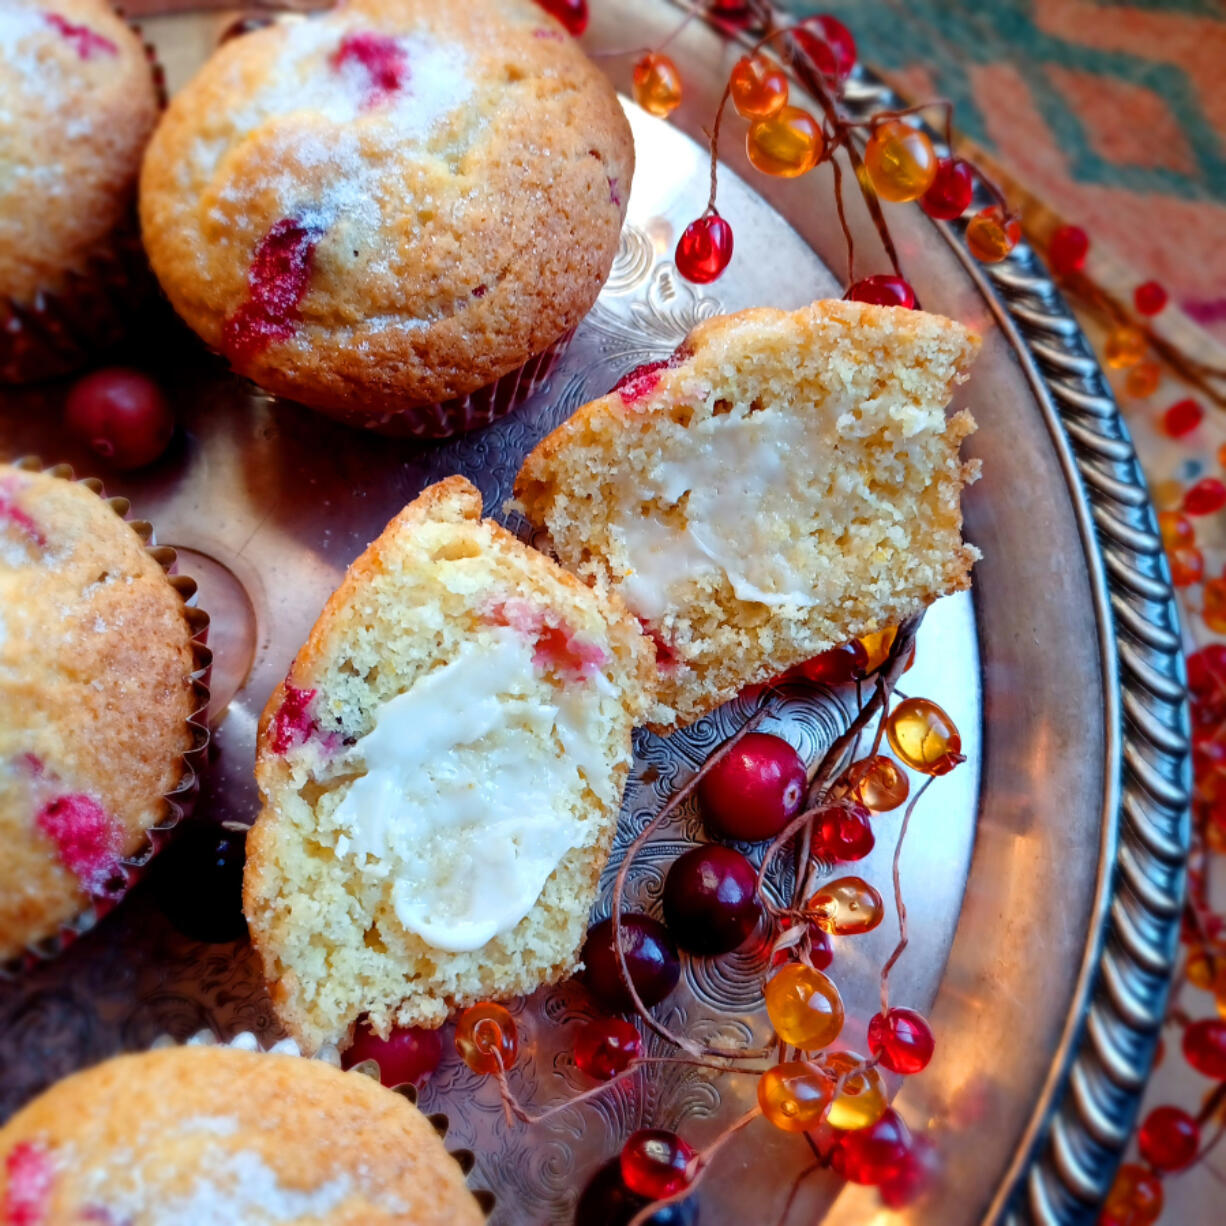 These pretty muffins have whole fresh cranberries, fresh squeezed orange juice and a little eggnog.